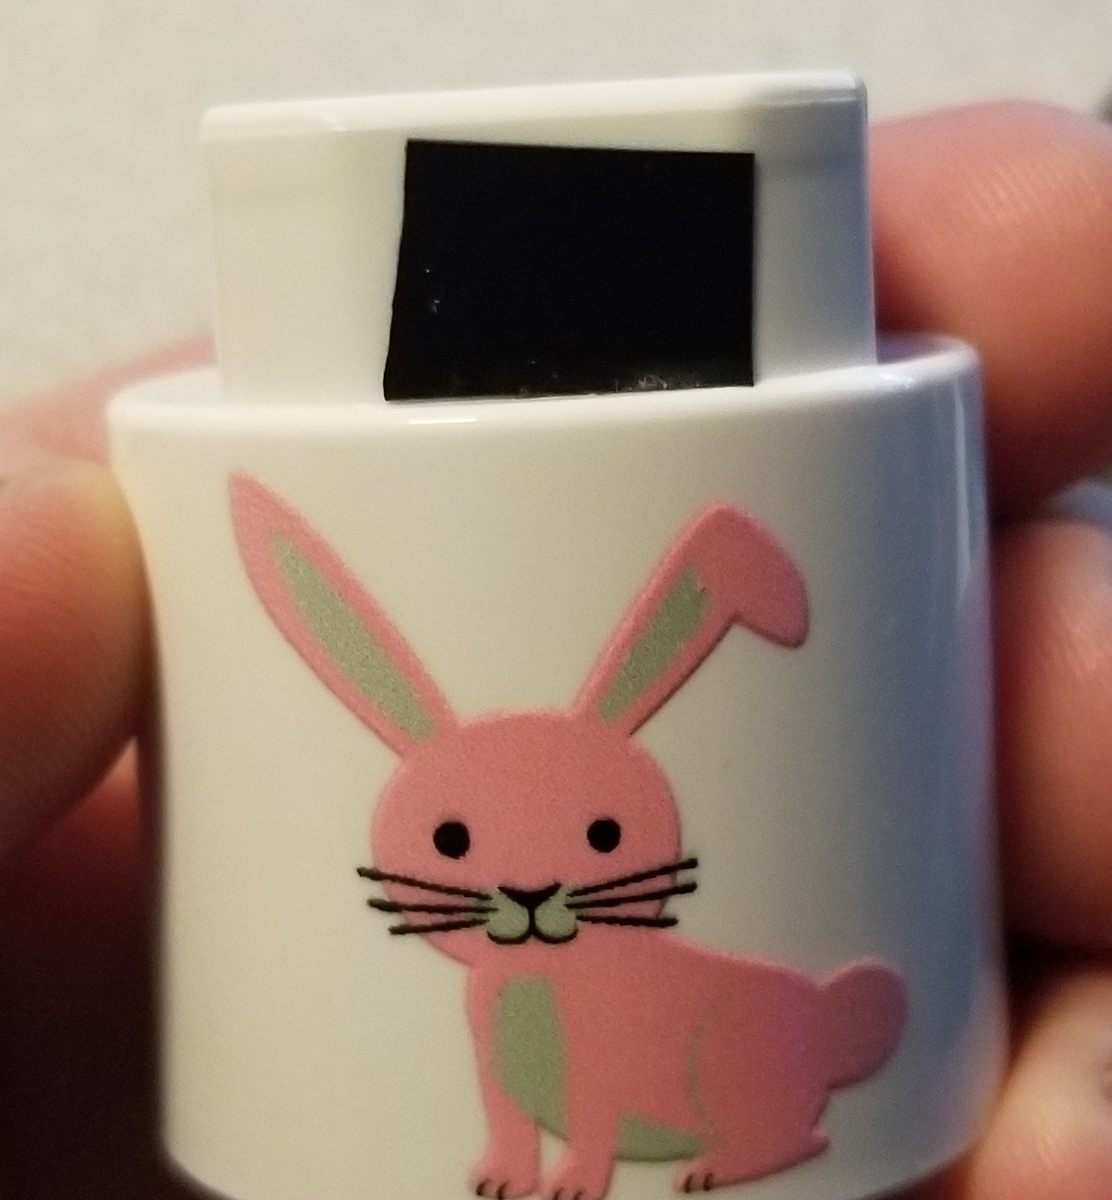 Sometimes being a scientist is just about using electrical tape to confuse a toy for children into thinking a rabbit is a dog.